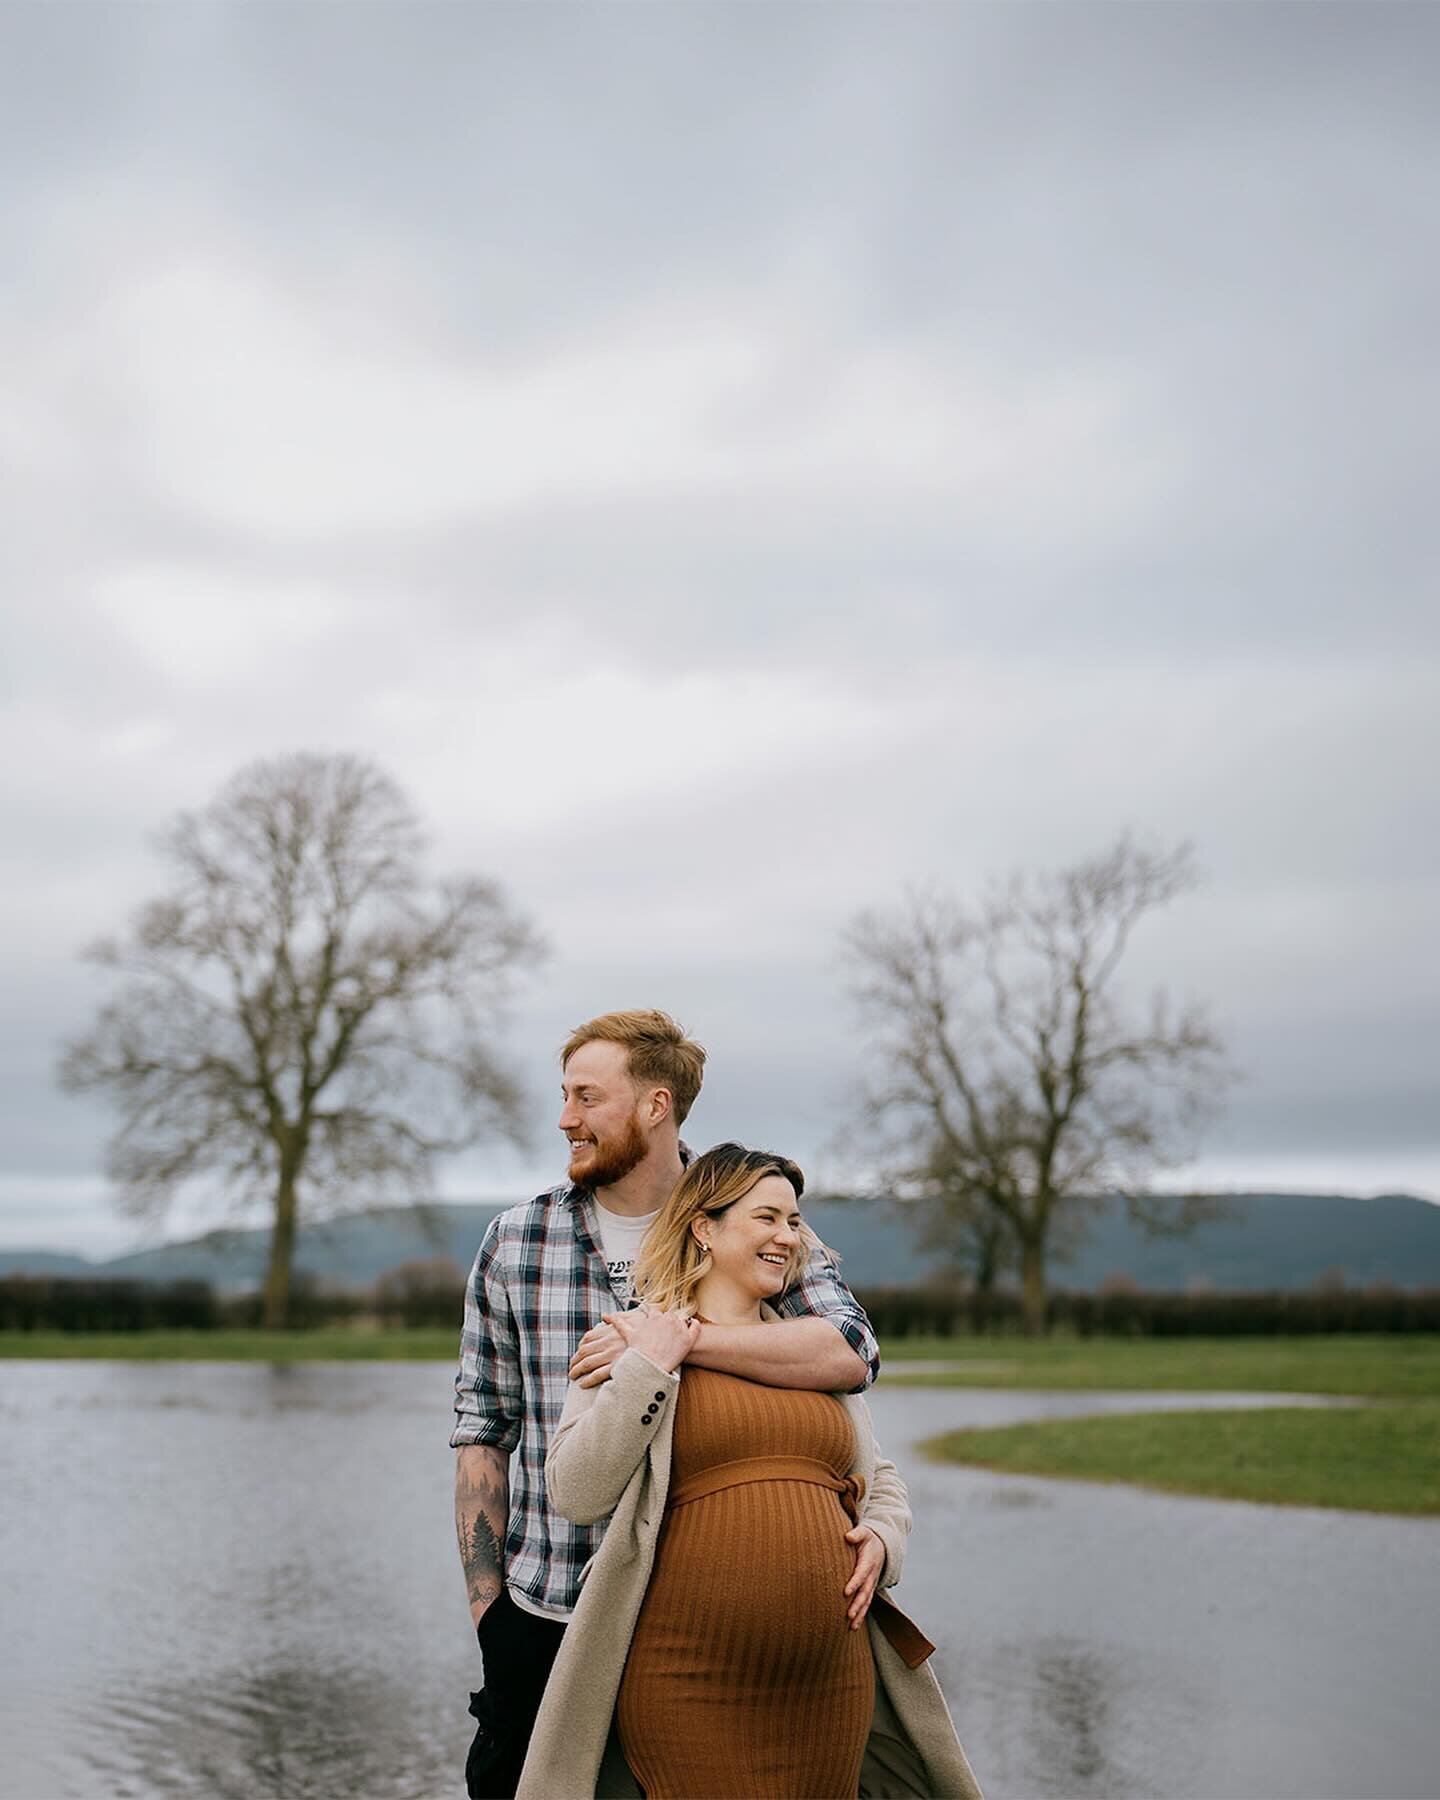 Sneak Peeks!

A great afternoon capturing some special memories for Gabbi and Ben 📸

&bull;

#maternityshoot #somersetphotographer #somersetmaternityphotographer #somersetweddingphotographer